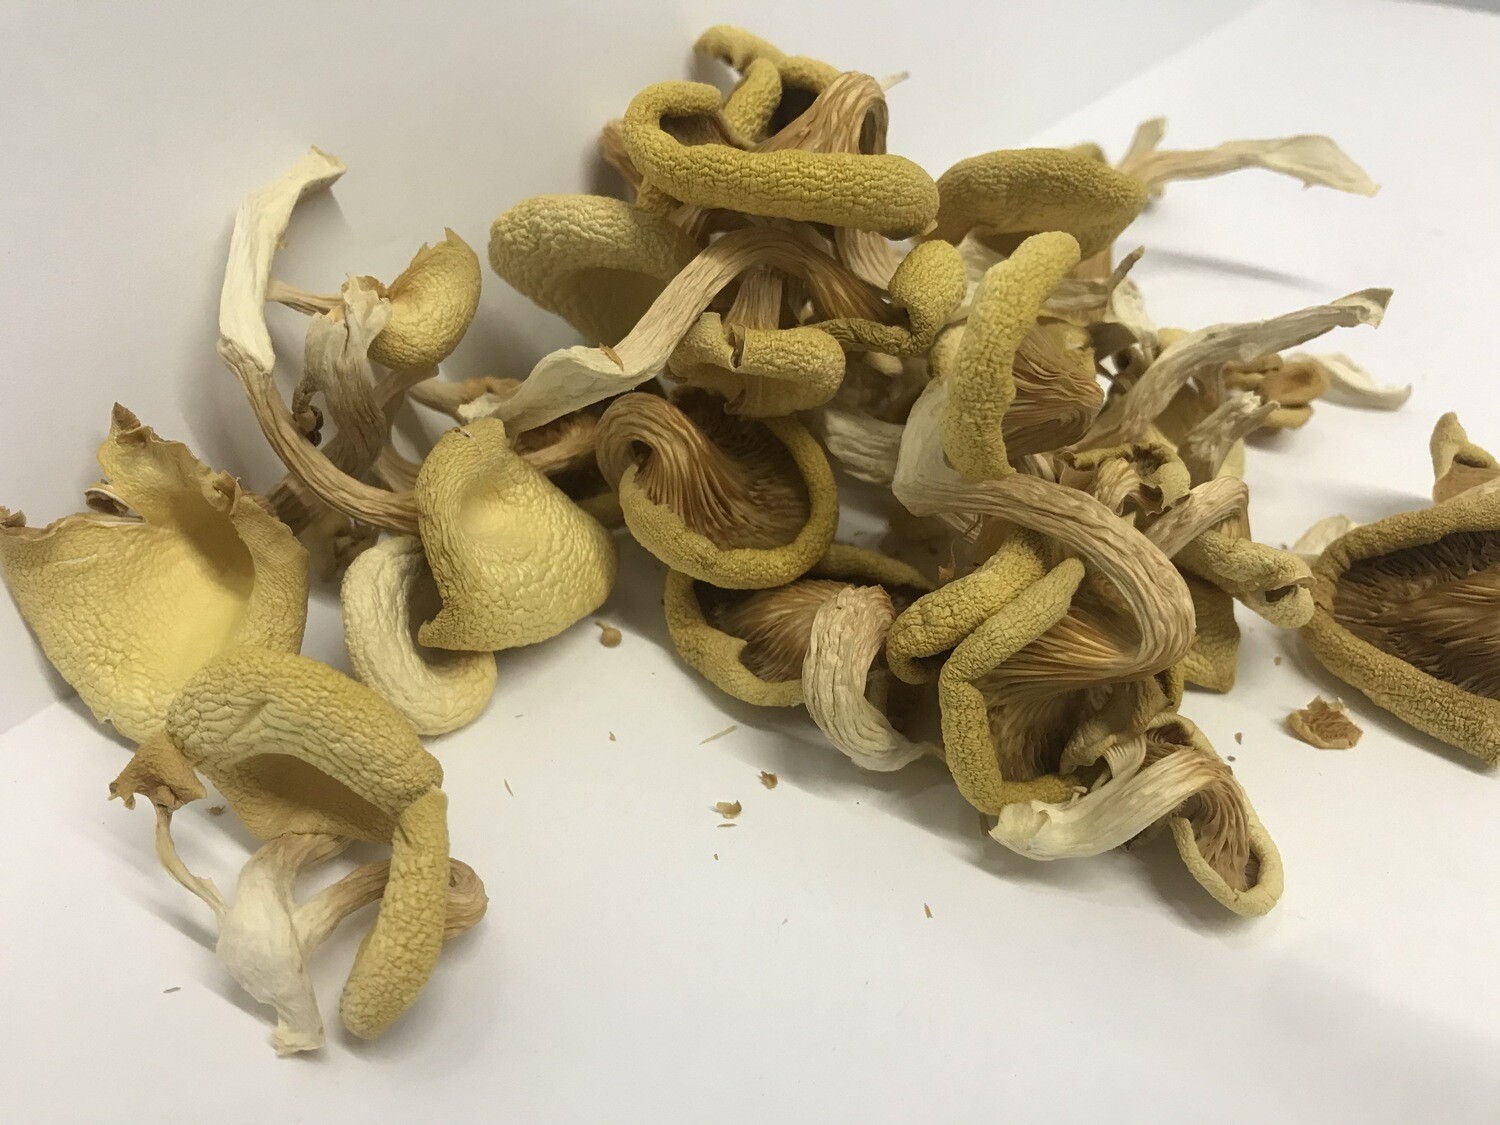 Gold Oyster Mushrooms 1oz (dried)